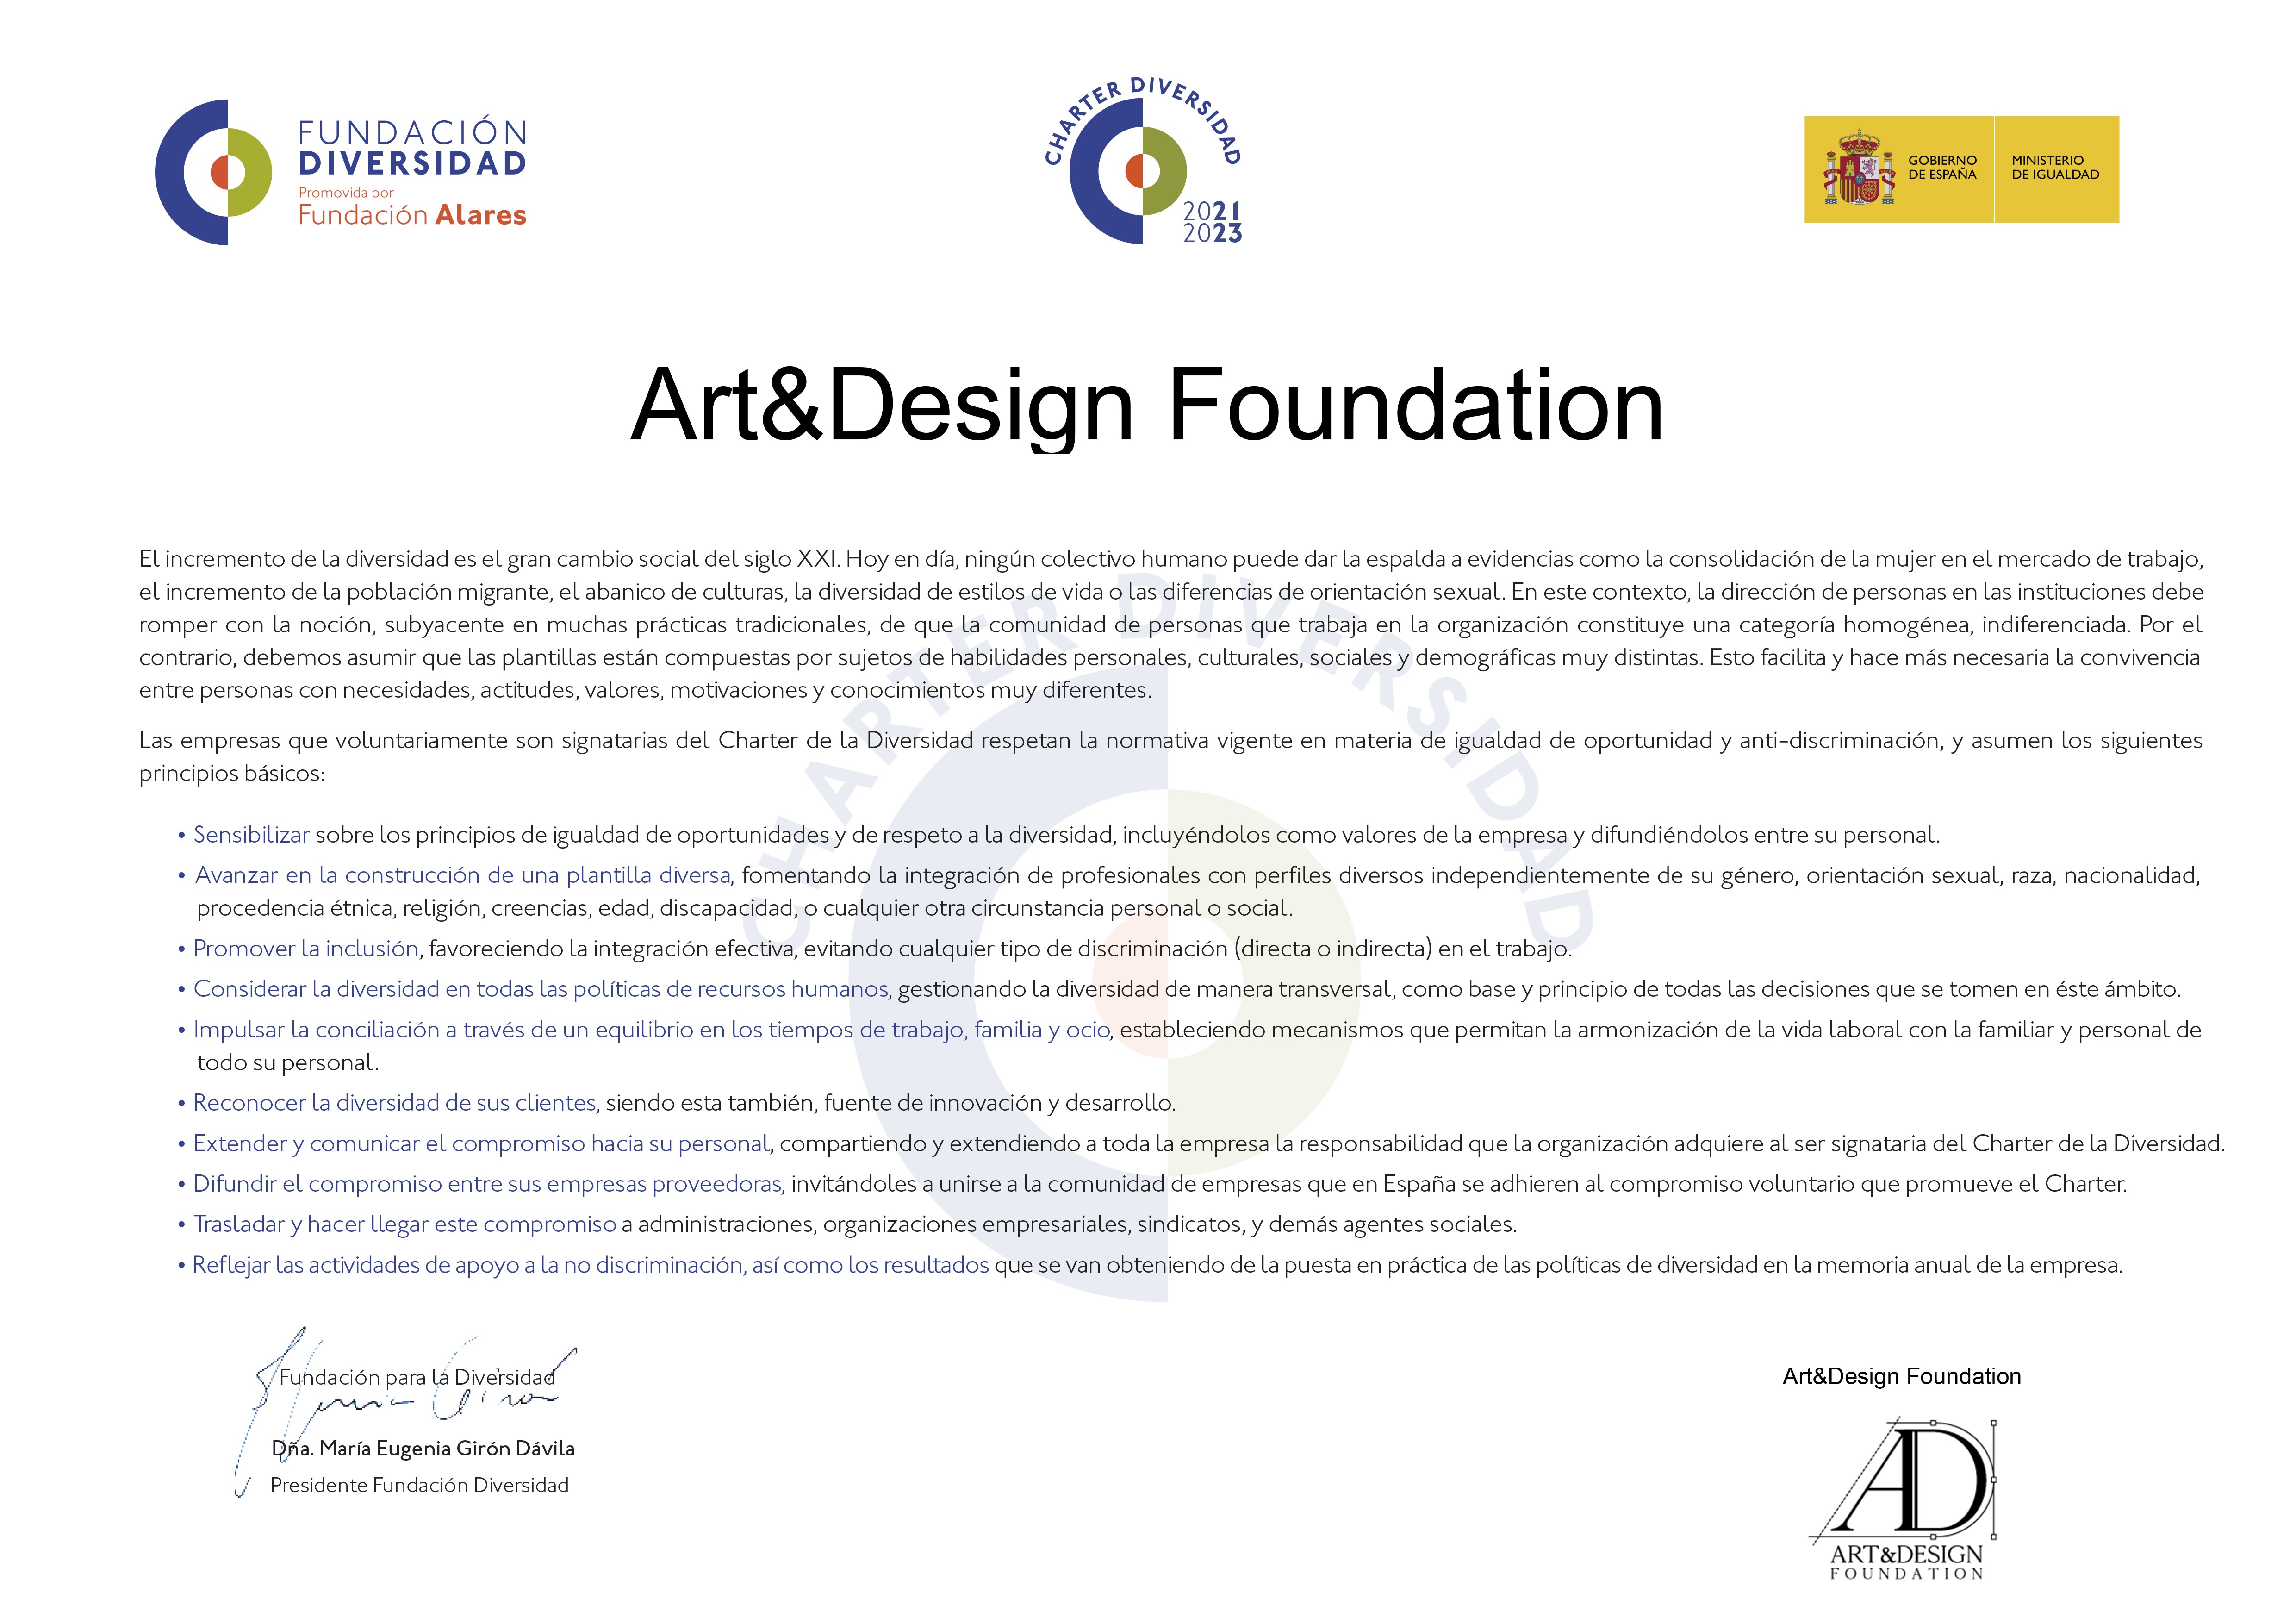 The Art & Design Foundation has joined the Diversity Charter